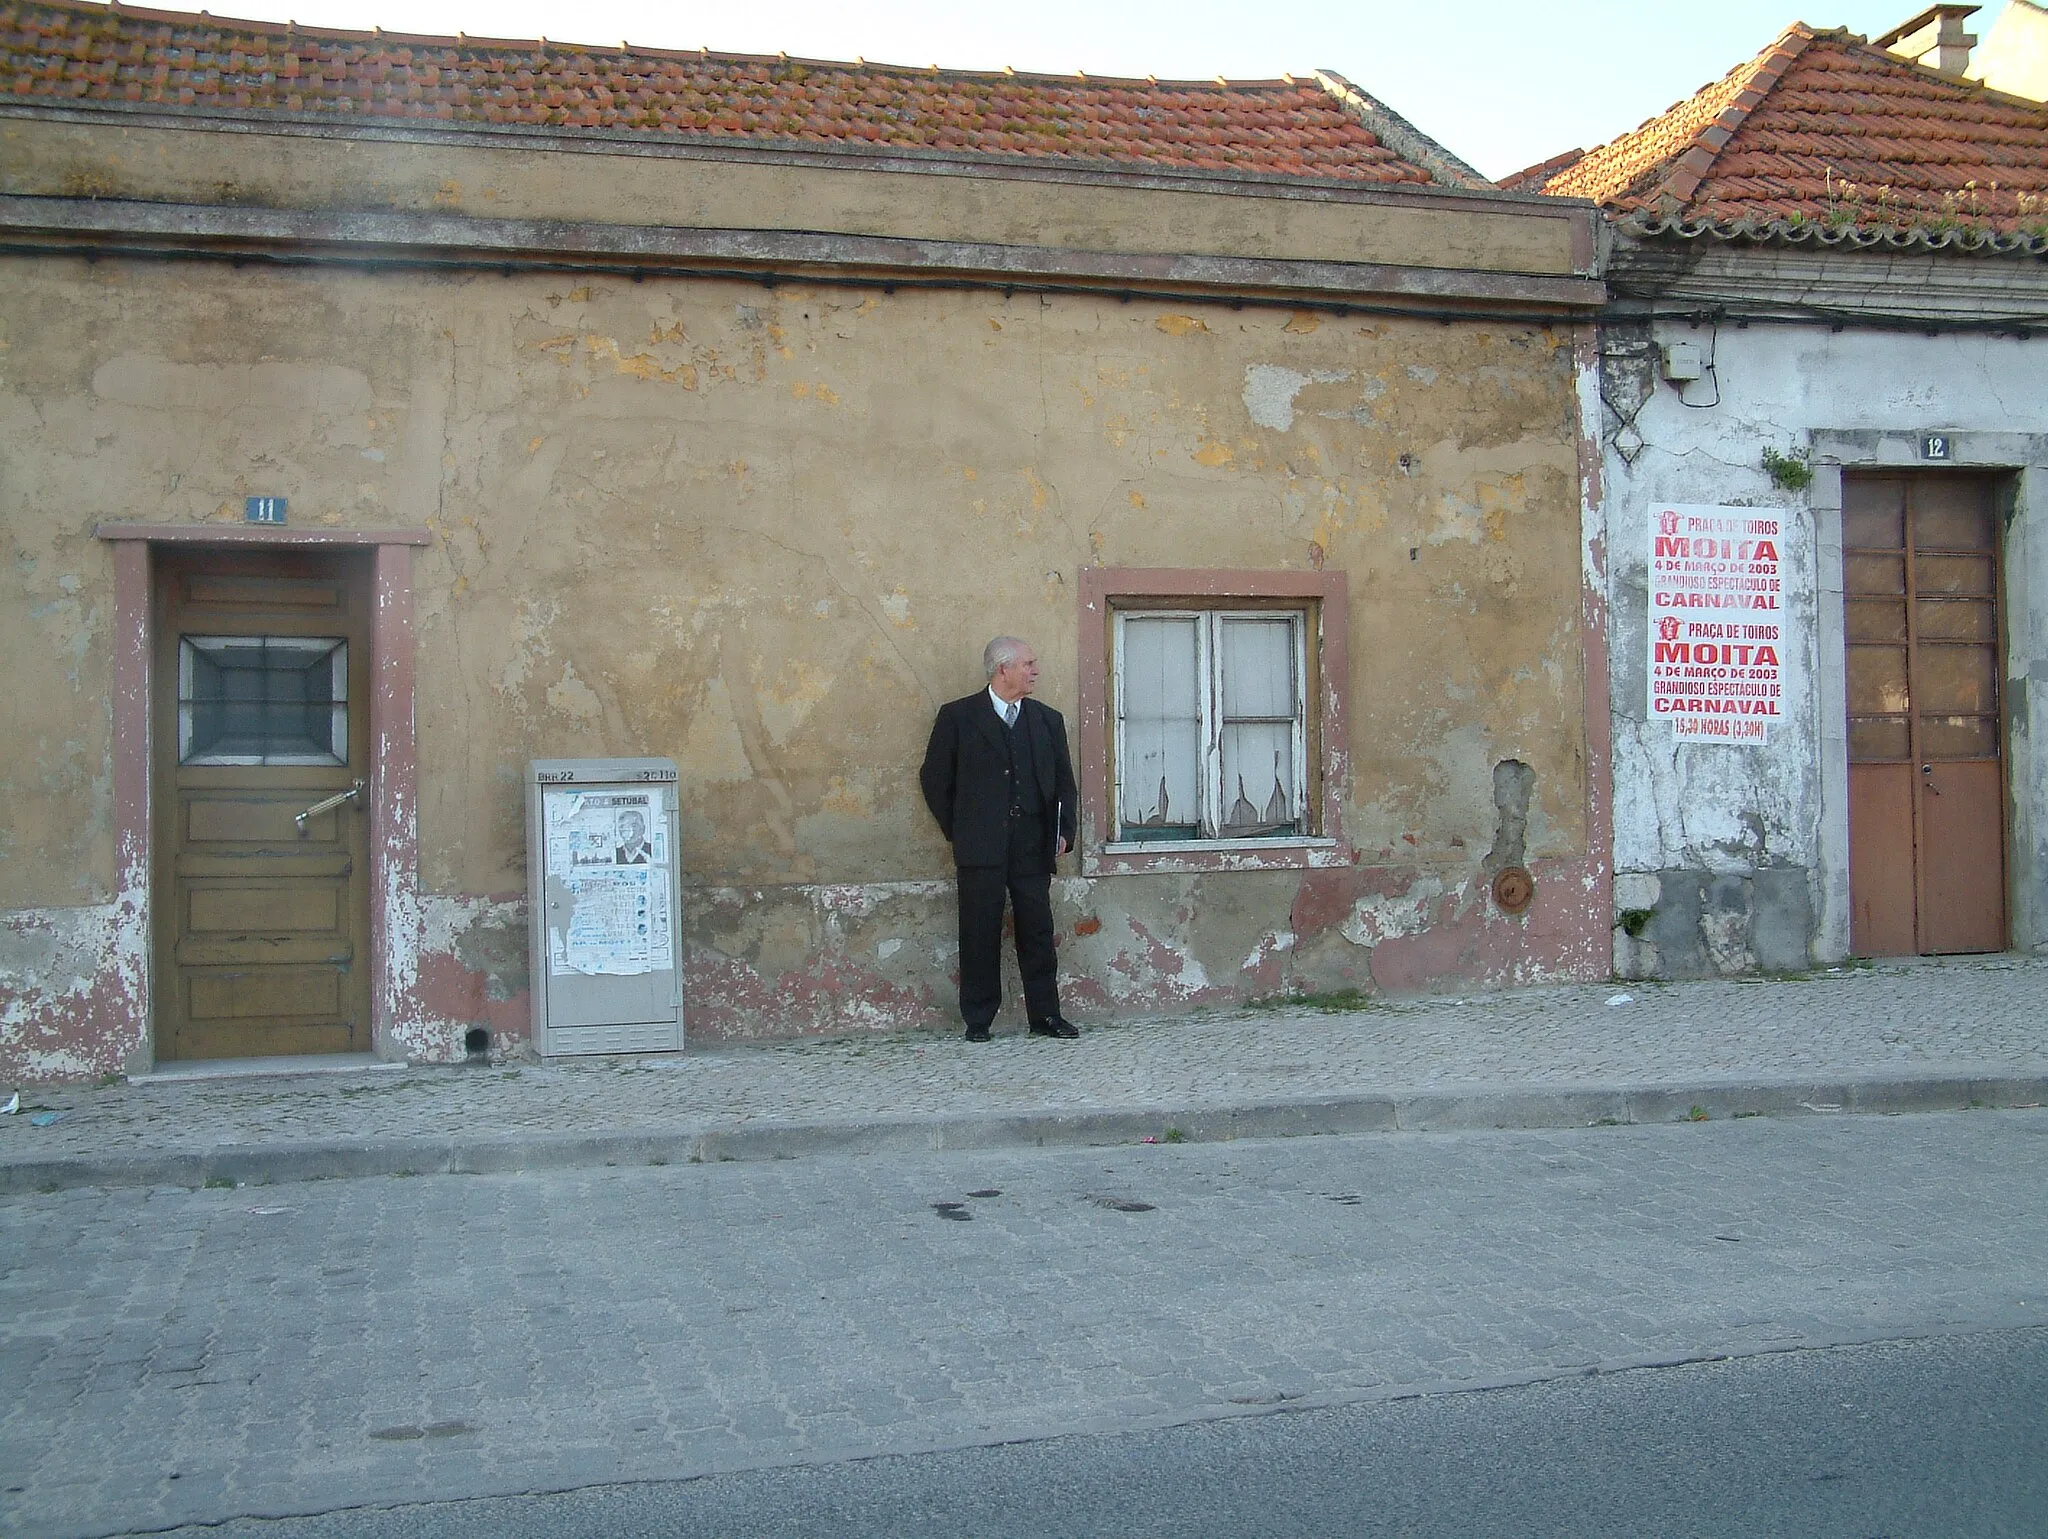 Photo showing: Notice the contrast between the decrepit paint on the walls and the impeccable dress of the old man. Taken in small village "Santo António da Charneca" near Barreiro in Portugal.